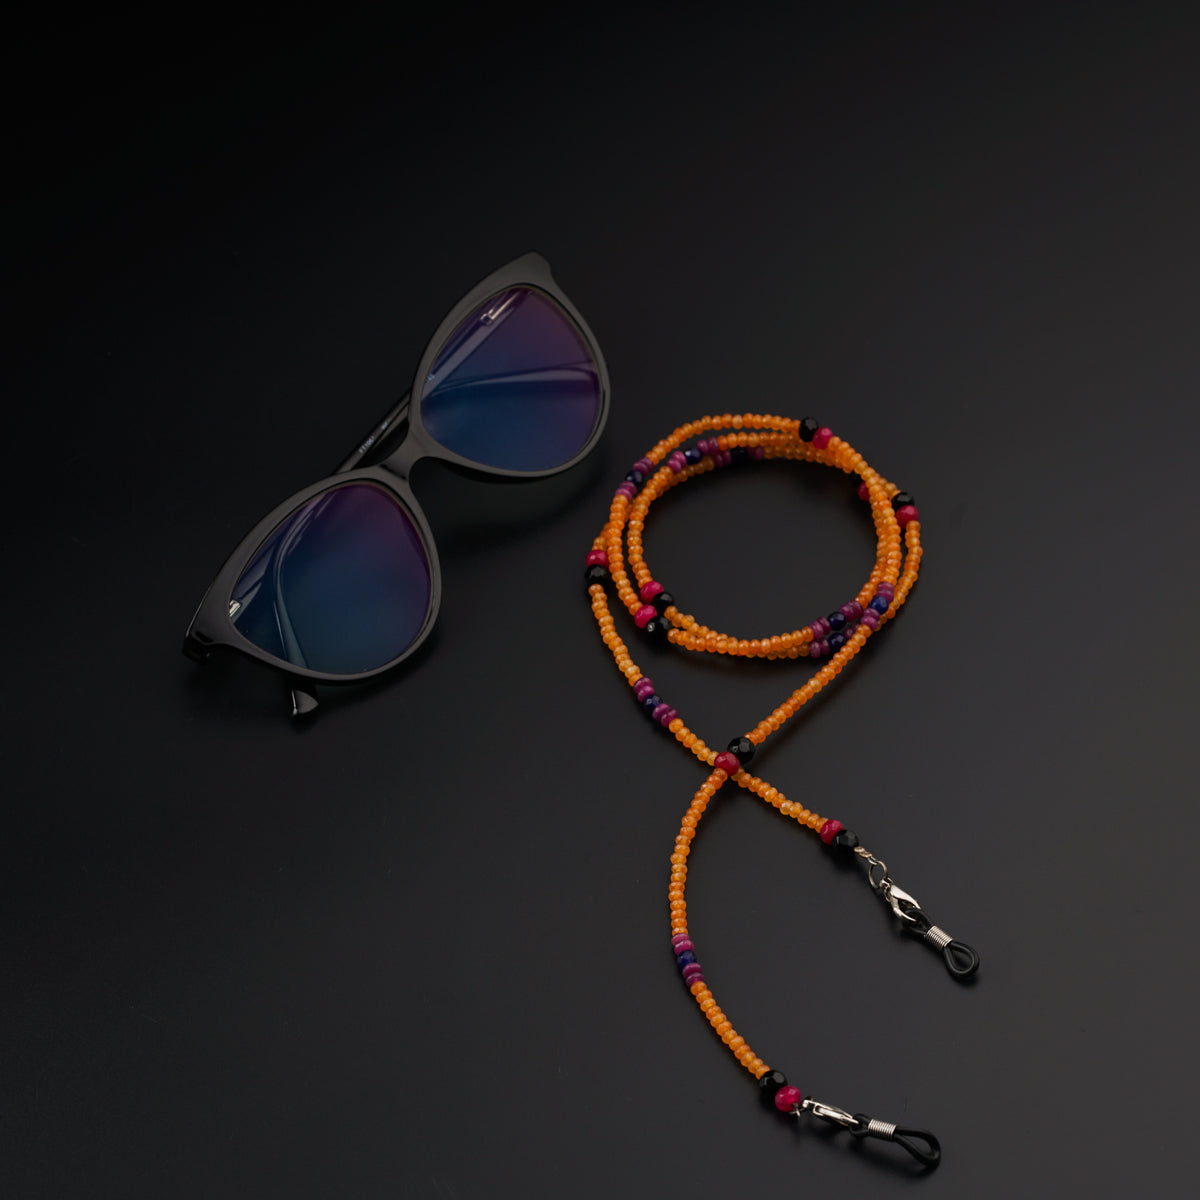 a pair of sunglasses and a beaded lanyard